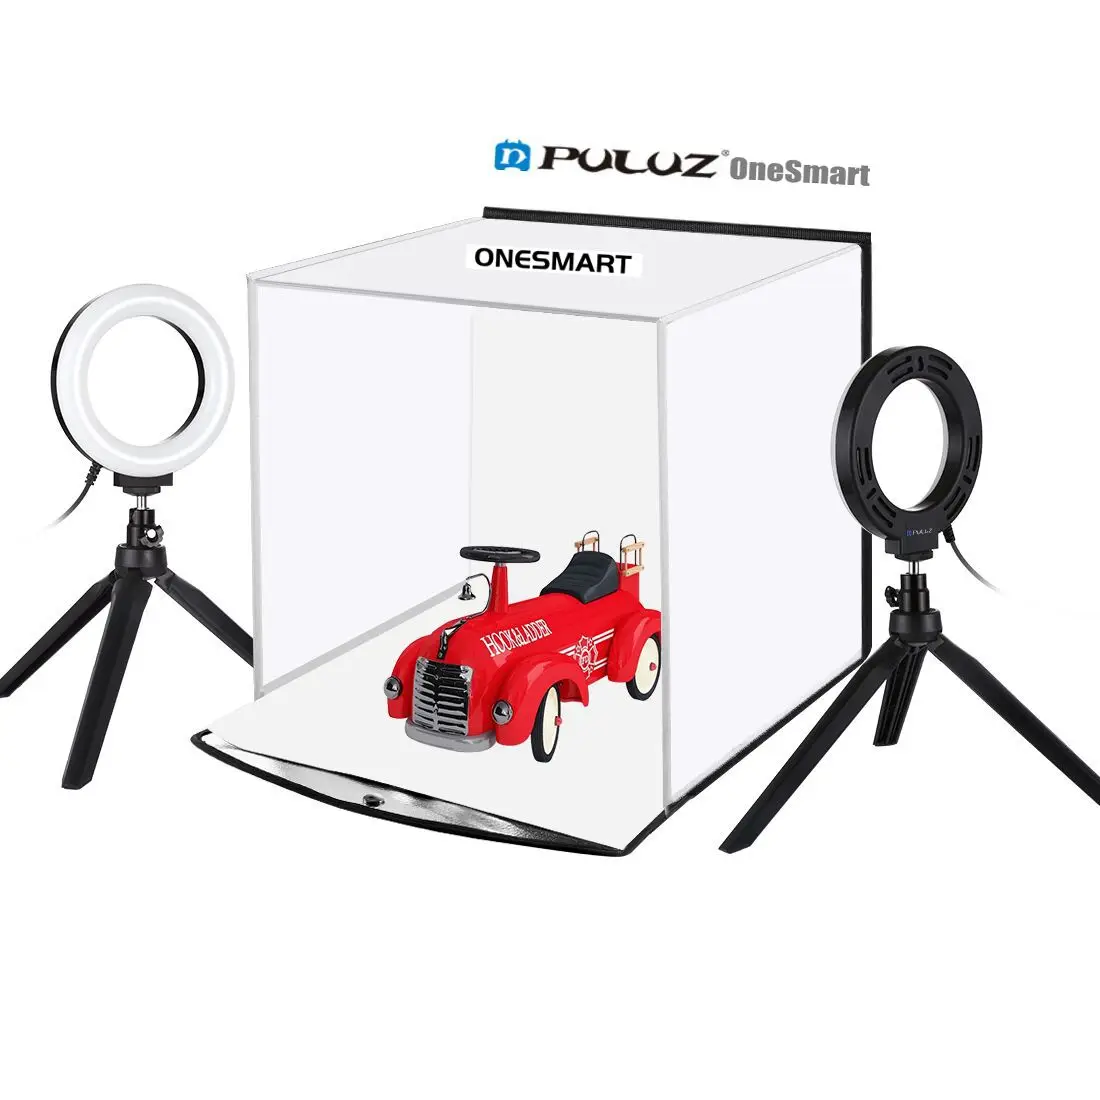 

In Stock Professional Puluz 30cm Mini Light Box Photo Studio Softbox Shooting Tent Tox Kit with 6 Colors Backdrops